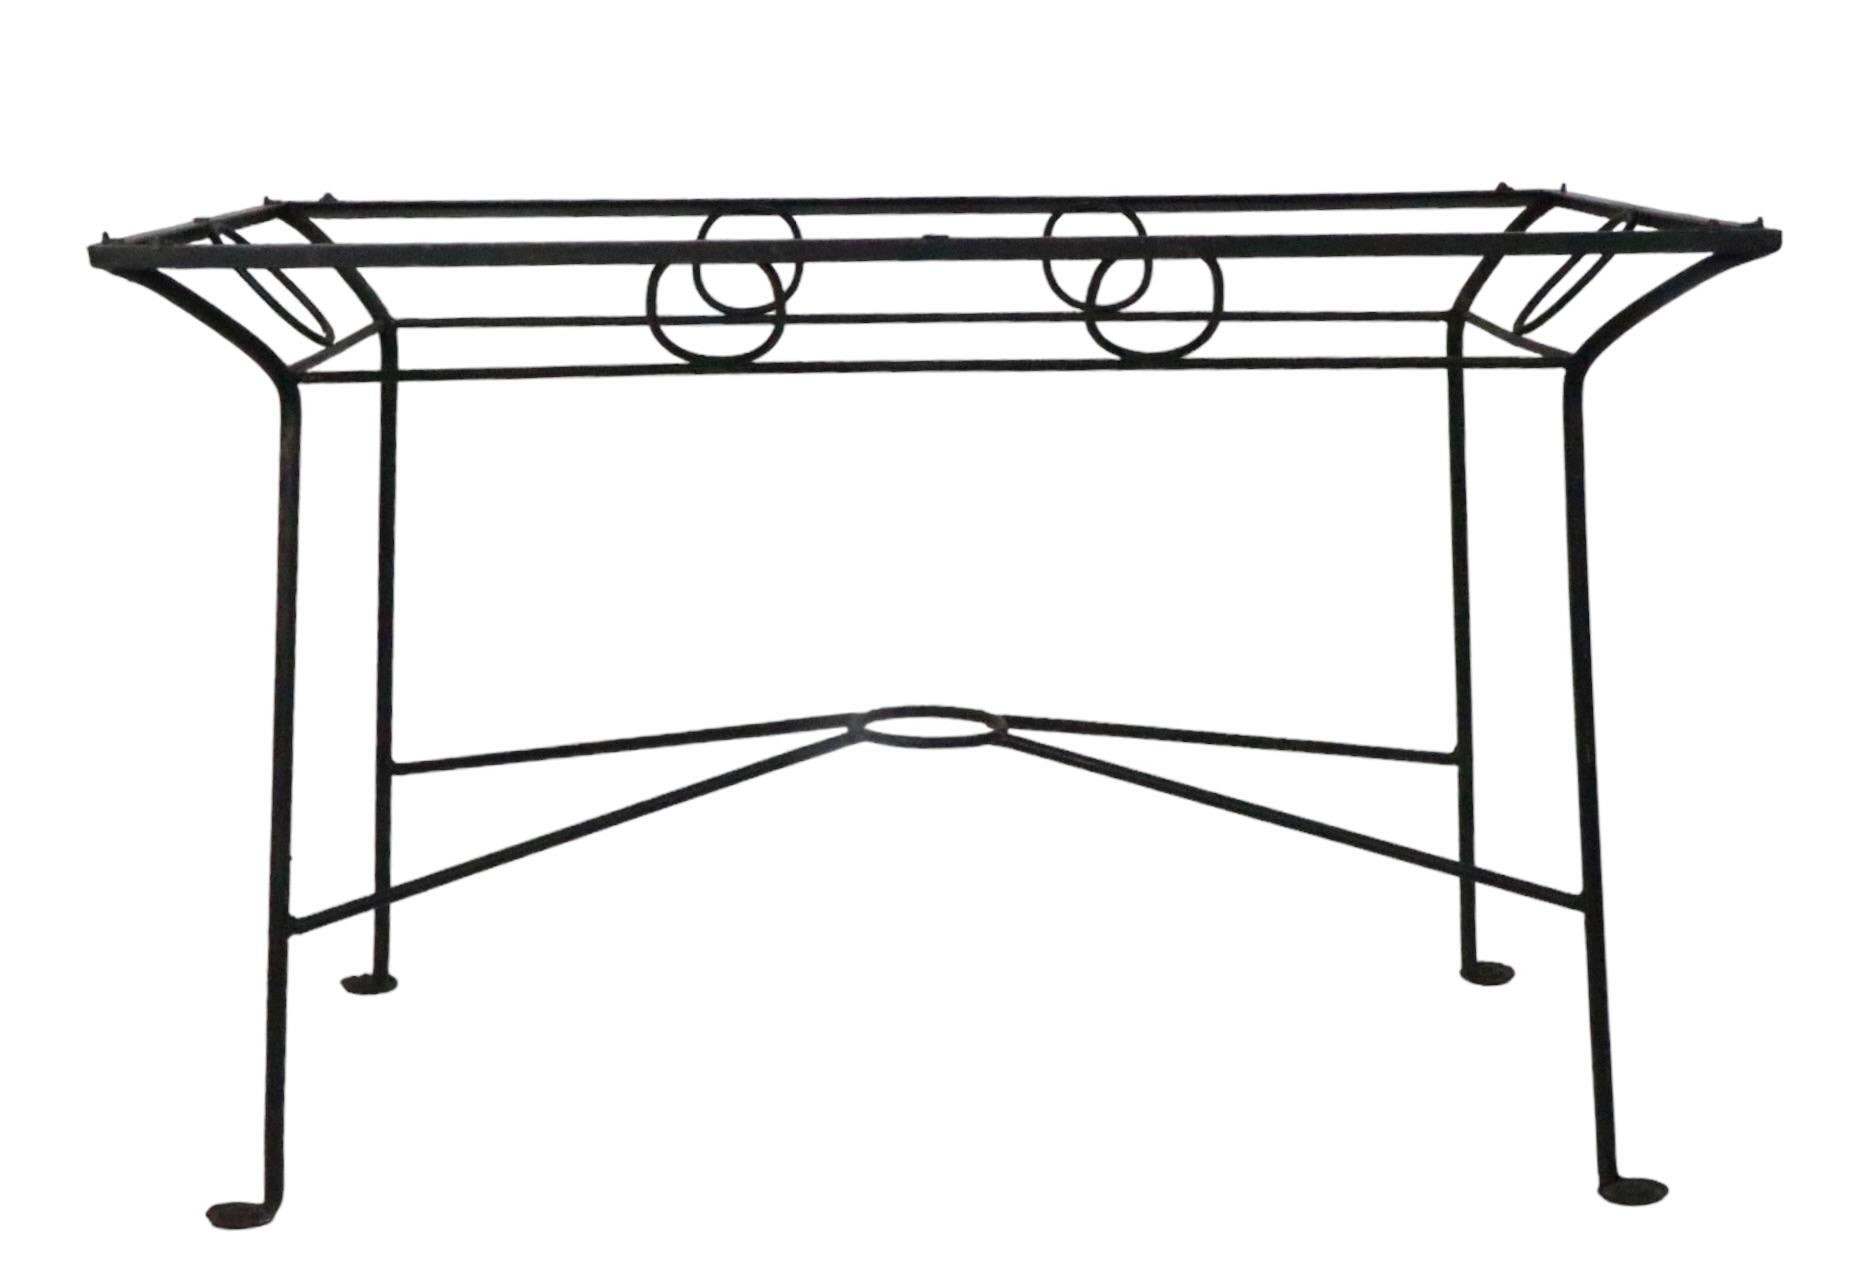 American Mid Century Wrought Iron Glass Top Garden Patio Poolside Dining Table 